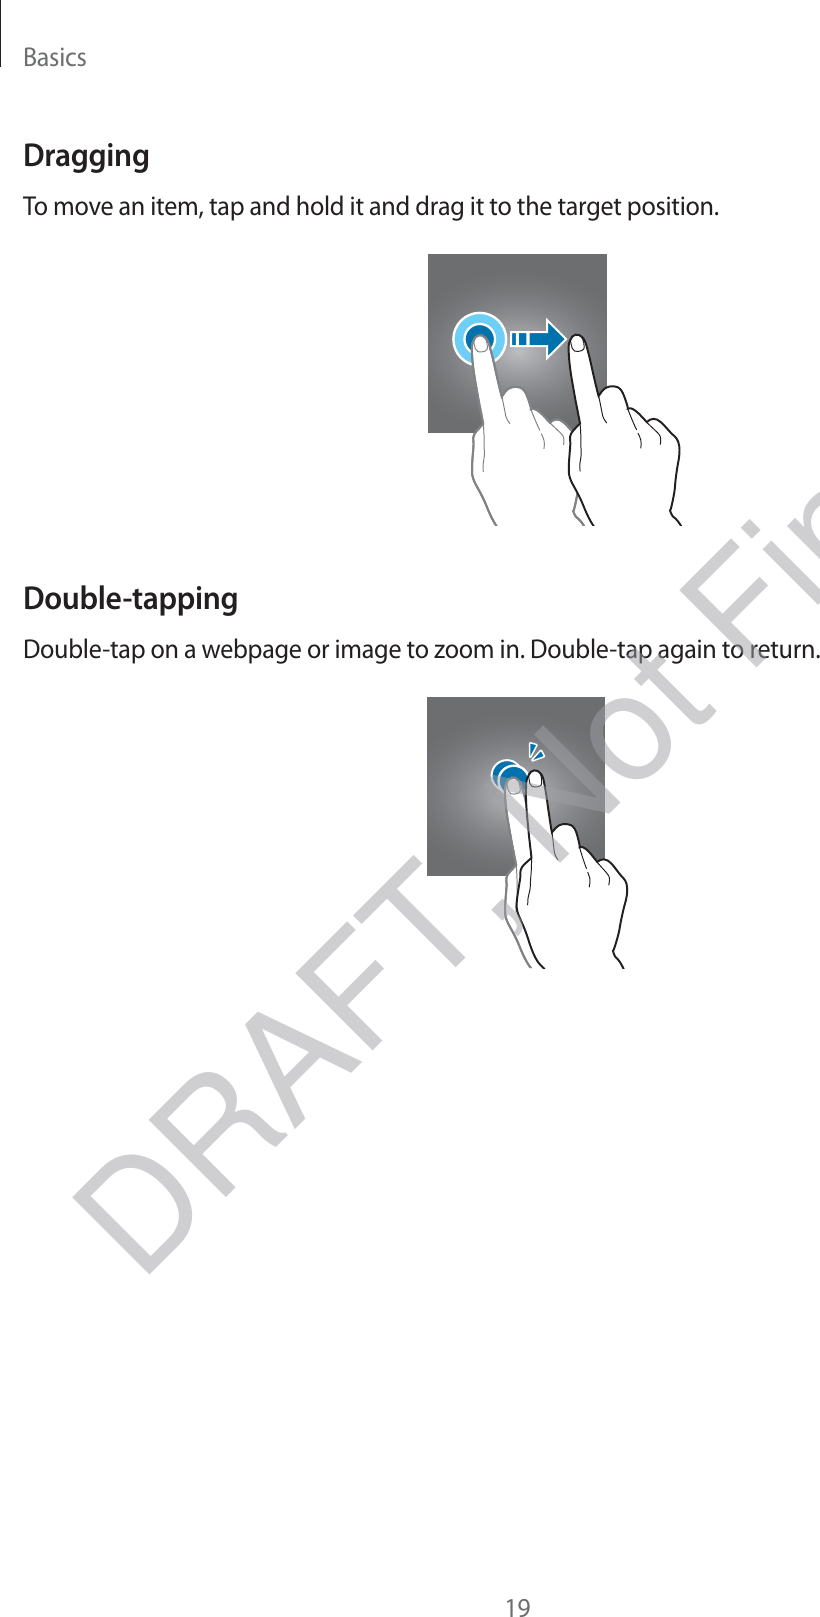 Basics19DraggingTo move an item, tap and hold it and drag it to the target position.Double-tappingDouble-tap on a webpage or image to zoom in. Double-tap again to return.DRAFT, Not Final